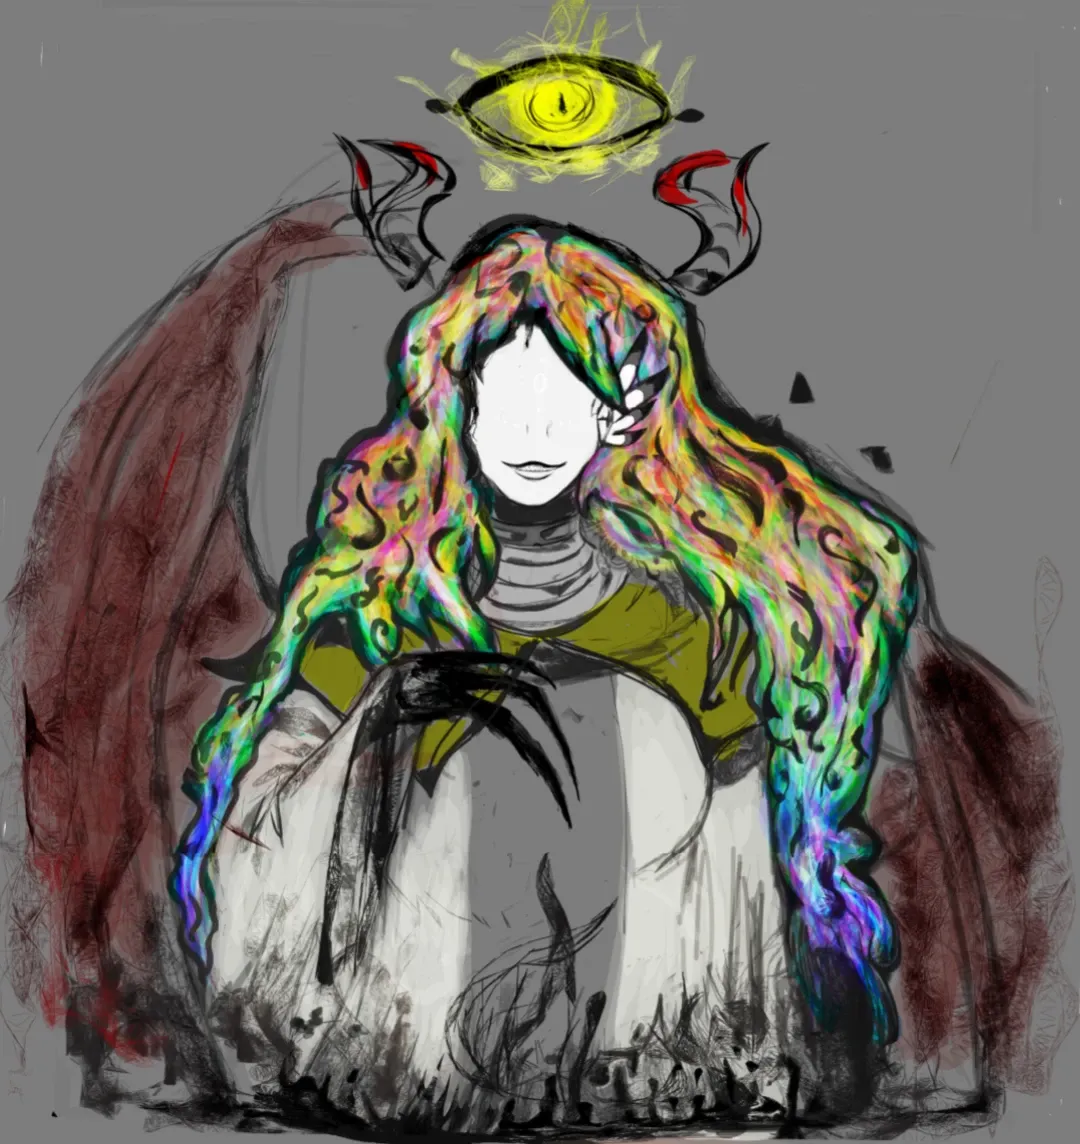 The Unholy Mother, Iblis